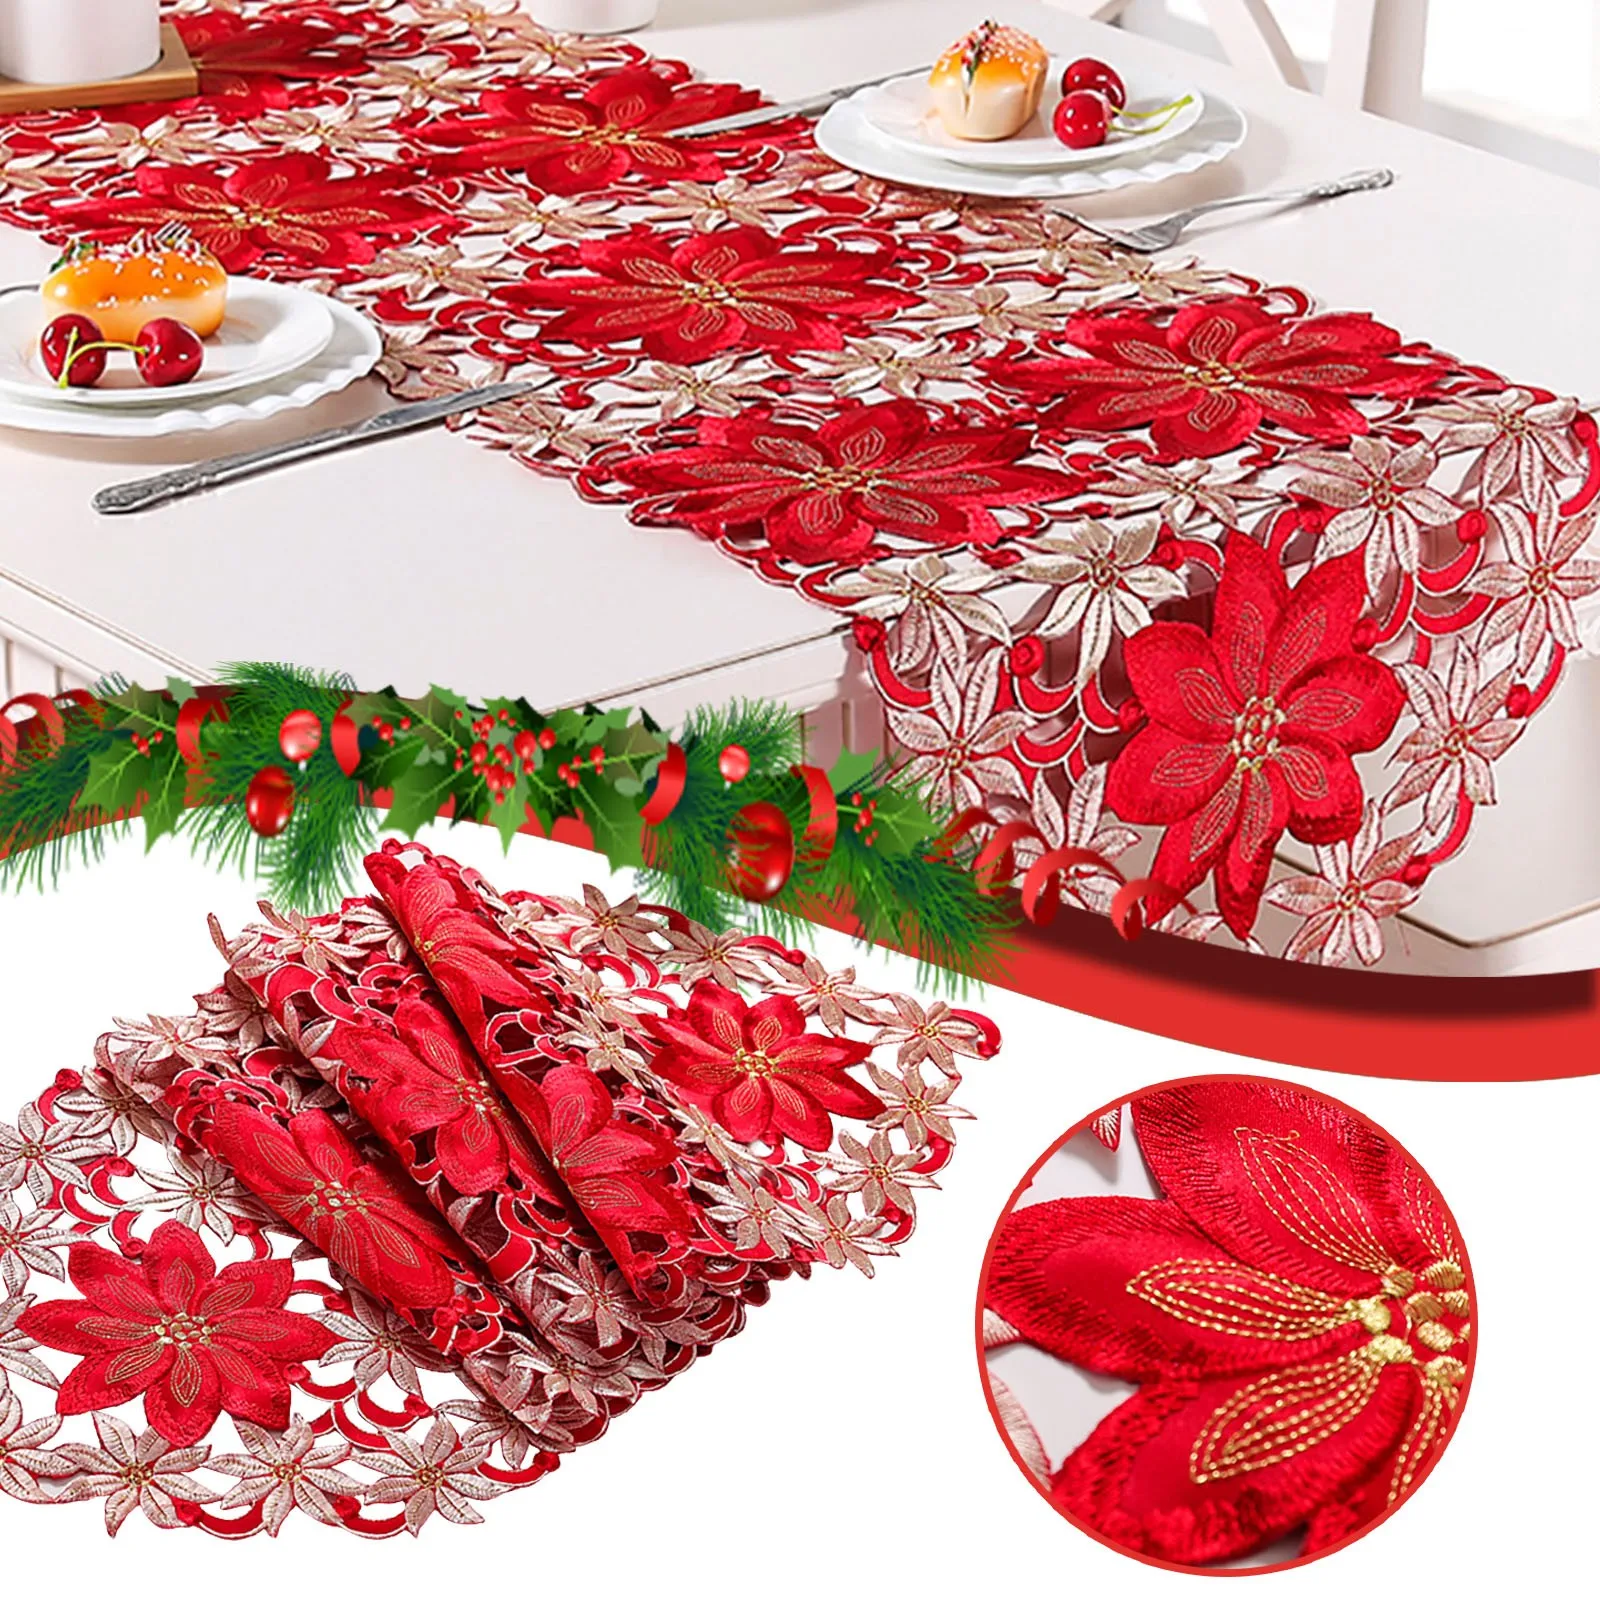 Christmas Table Runner Scarf Handmade 13.5 x 40.5 New home decor dining room accessory red green poinsettias Holiday holly berries